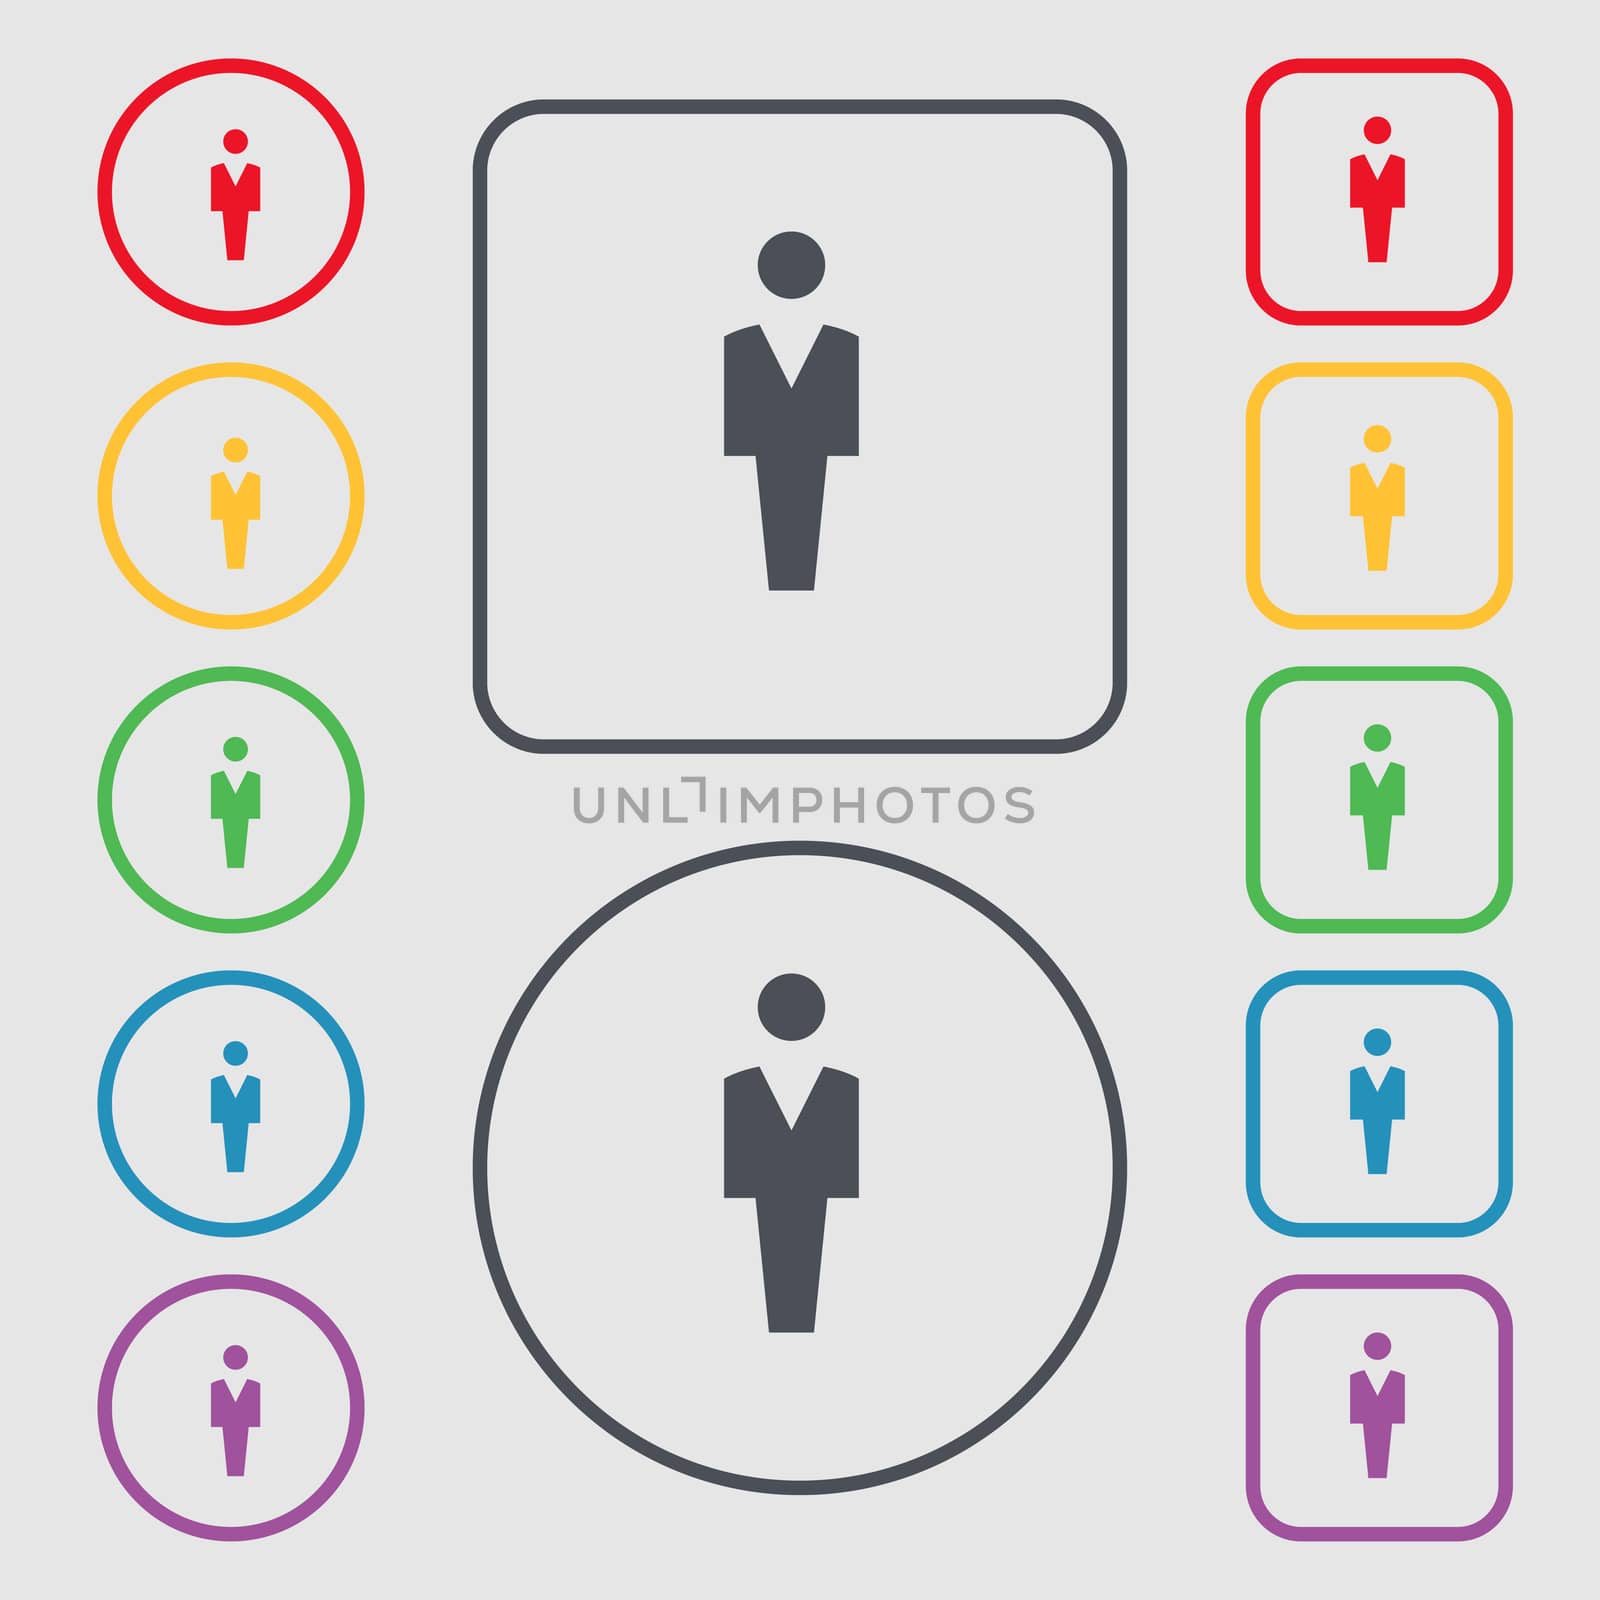 Human, Man Person, Male toilet icon sign. symbol on the Round and square buttons with frame. illustration